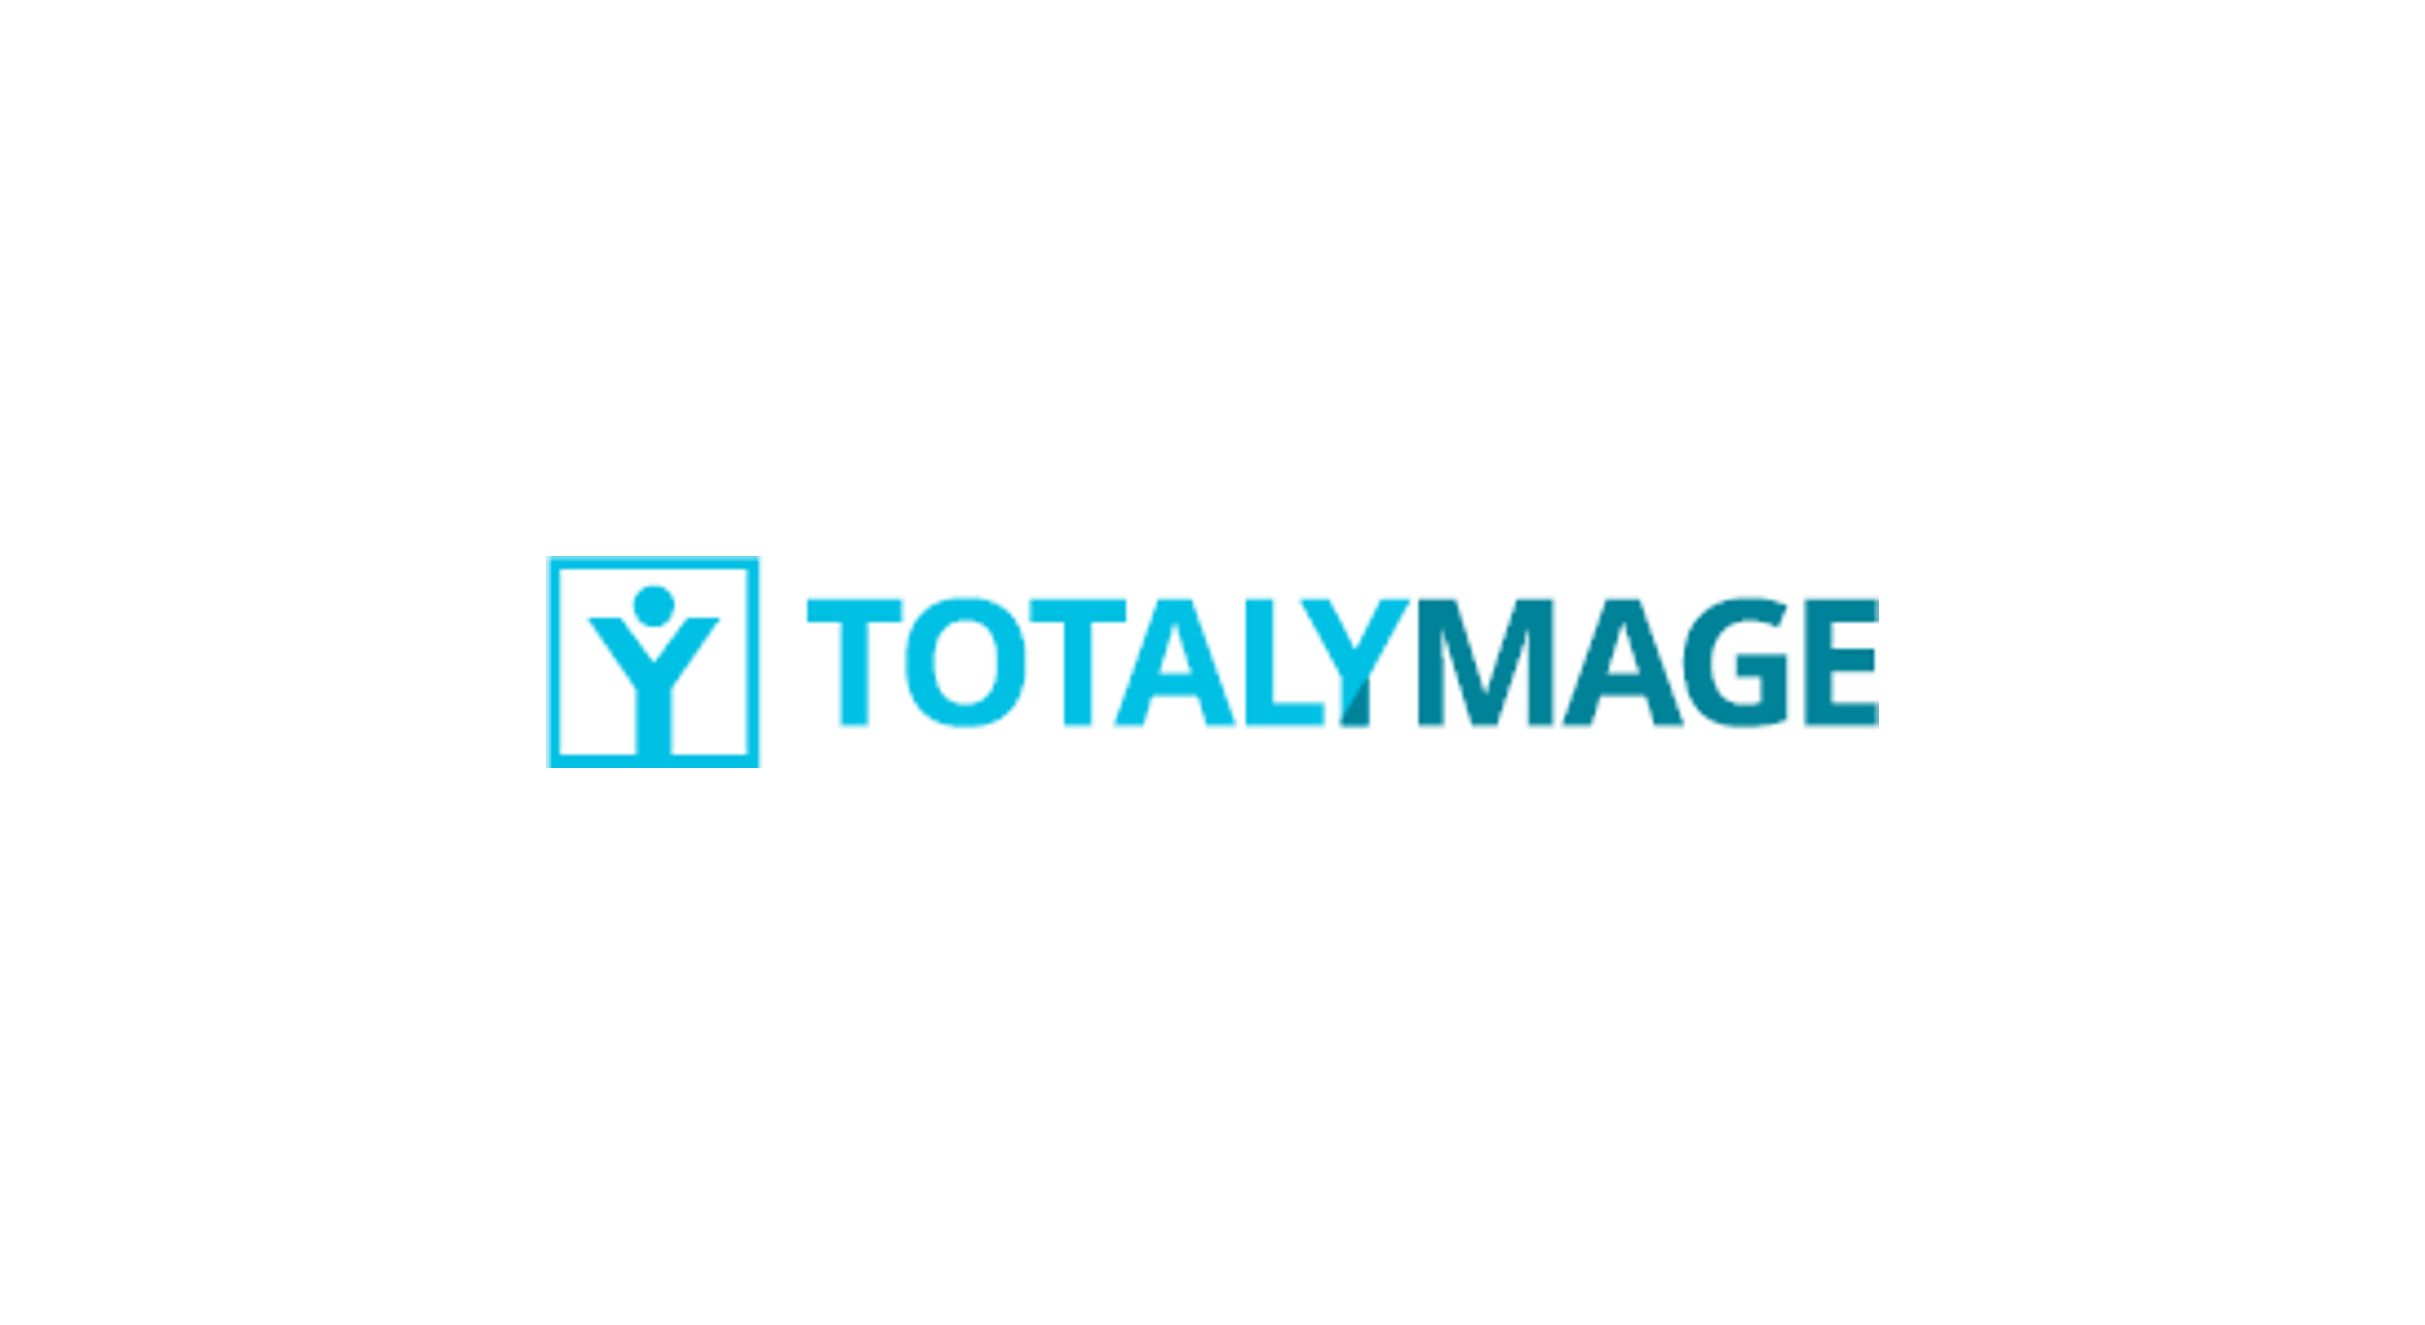 TotalYmage